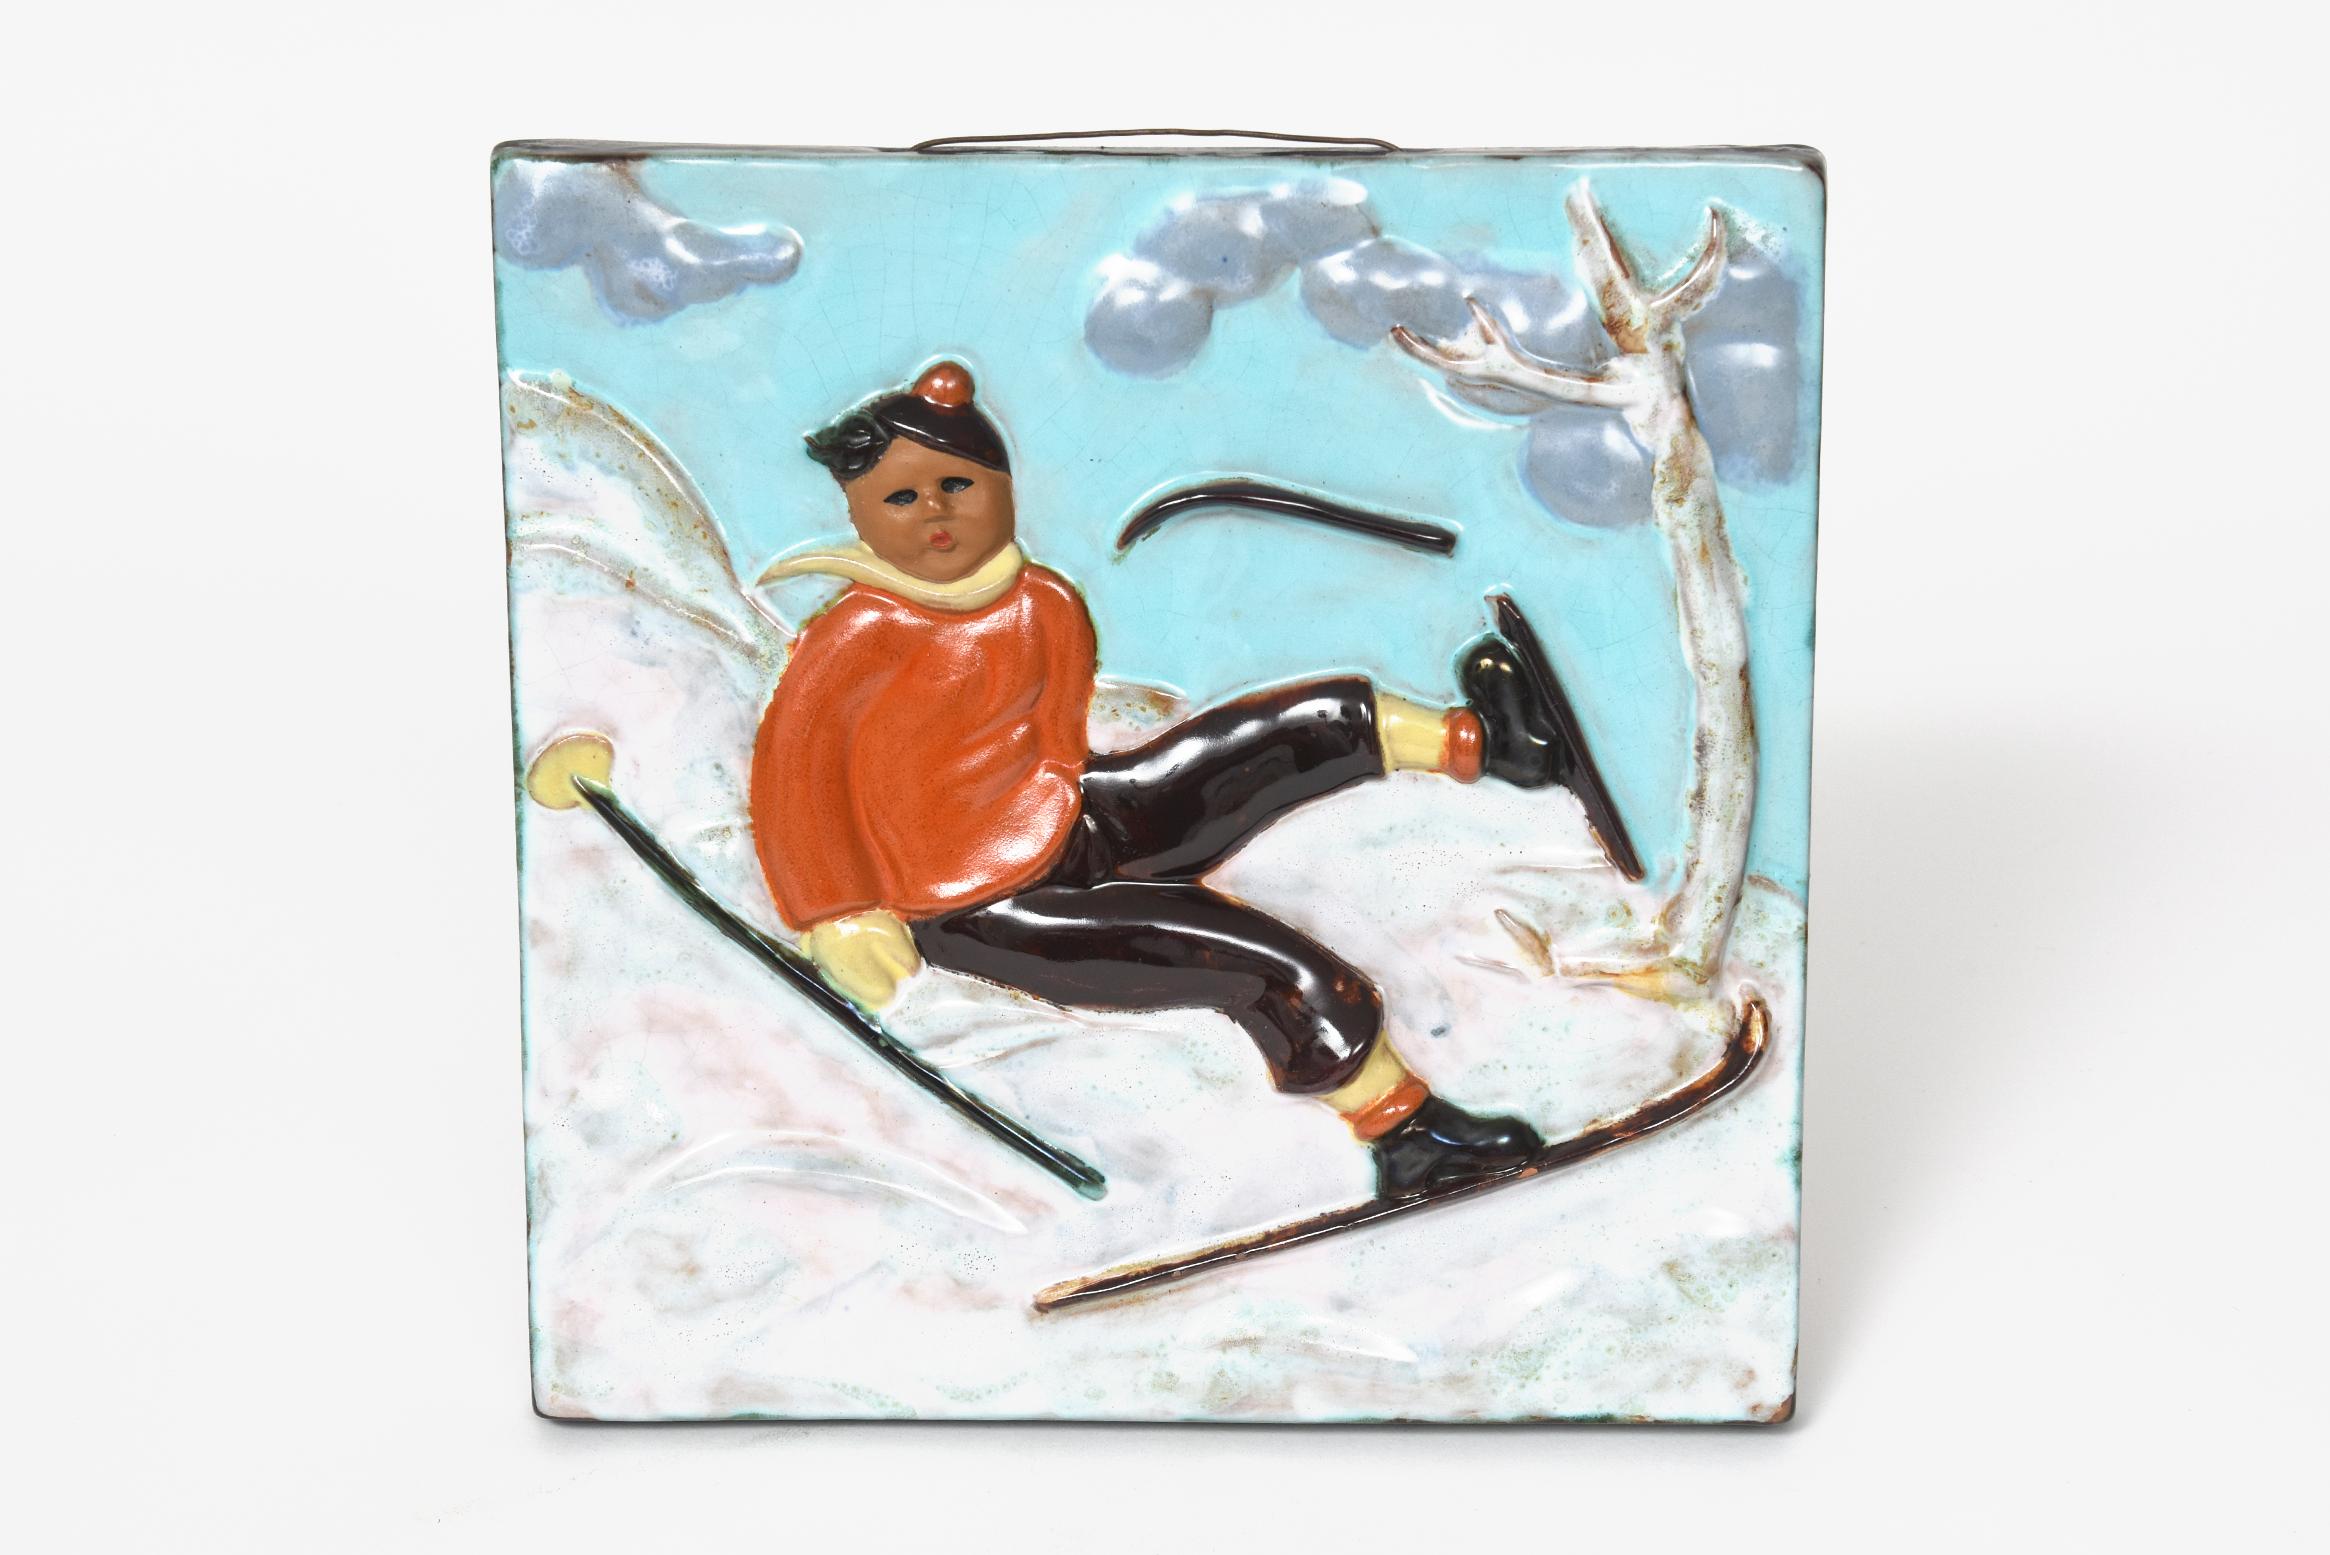 Goldscheider pottery plaque depicting in relief a falling skier boy with his ski breaking and flying off The young man is passing a tree while skiing down the mountain on the snow.

Marked Goldscheider Wien made in Austria 8238 over 65.